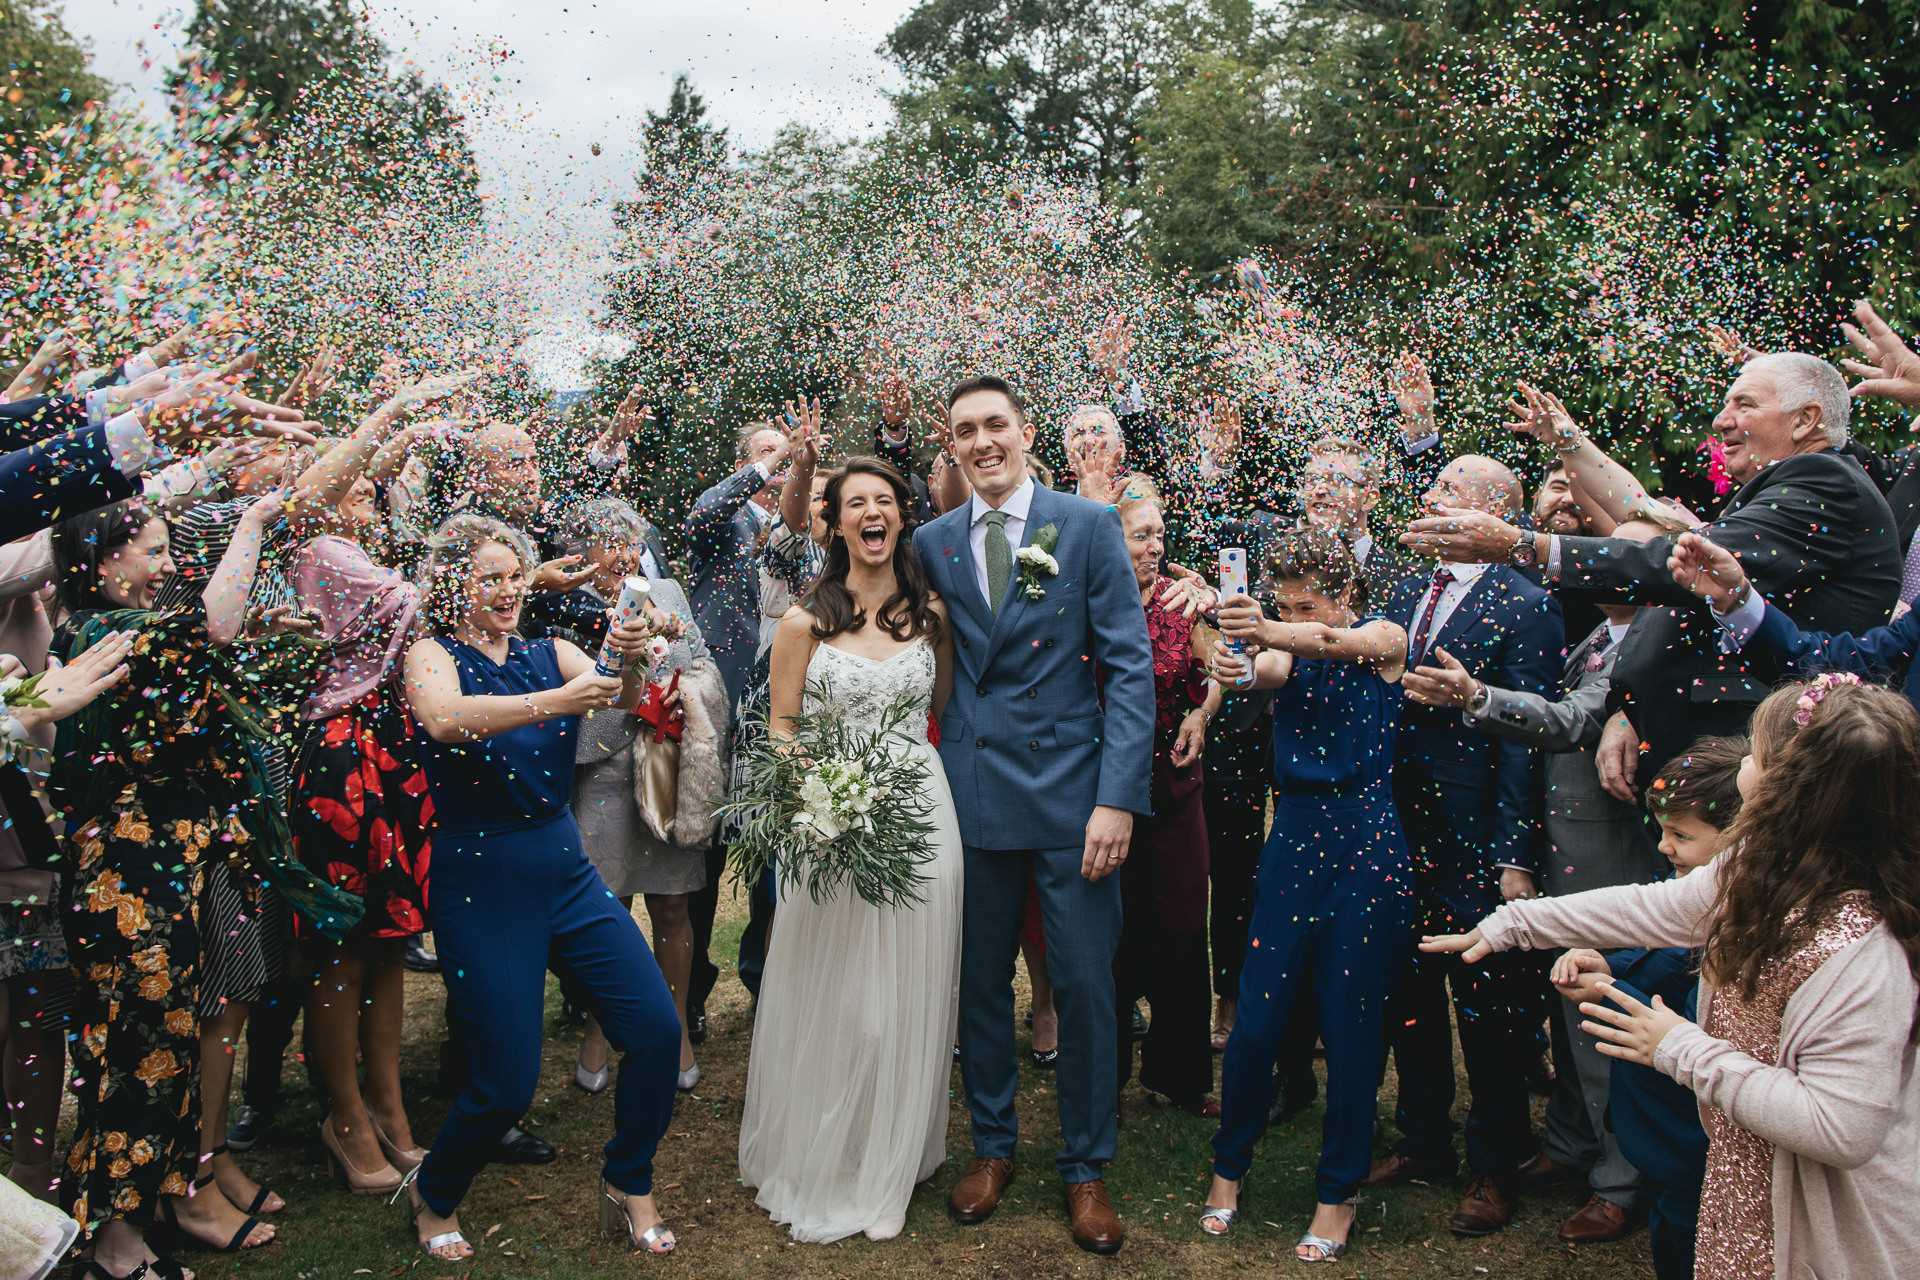 Wedding group laughing with enormous amount of confetti